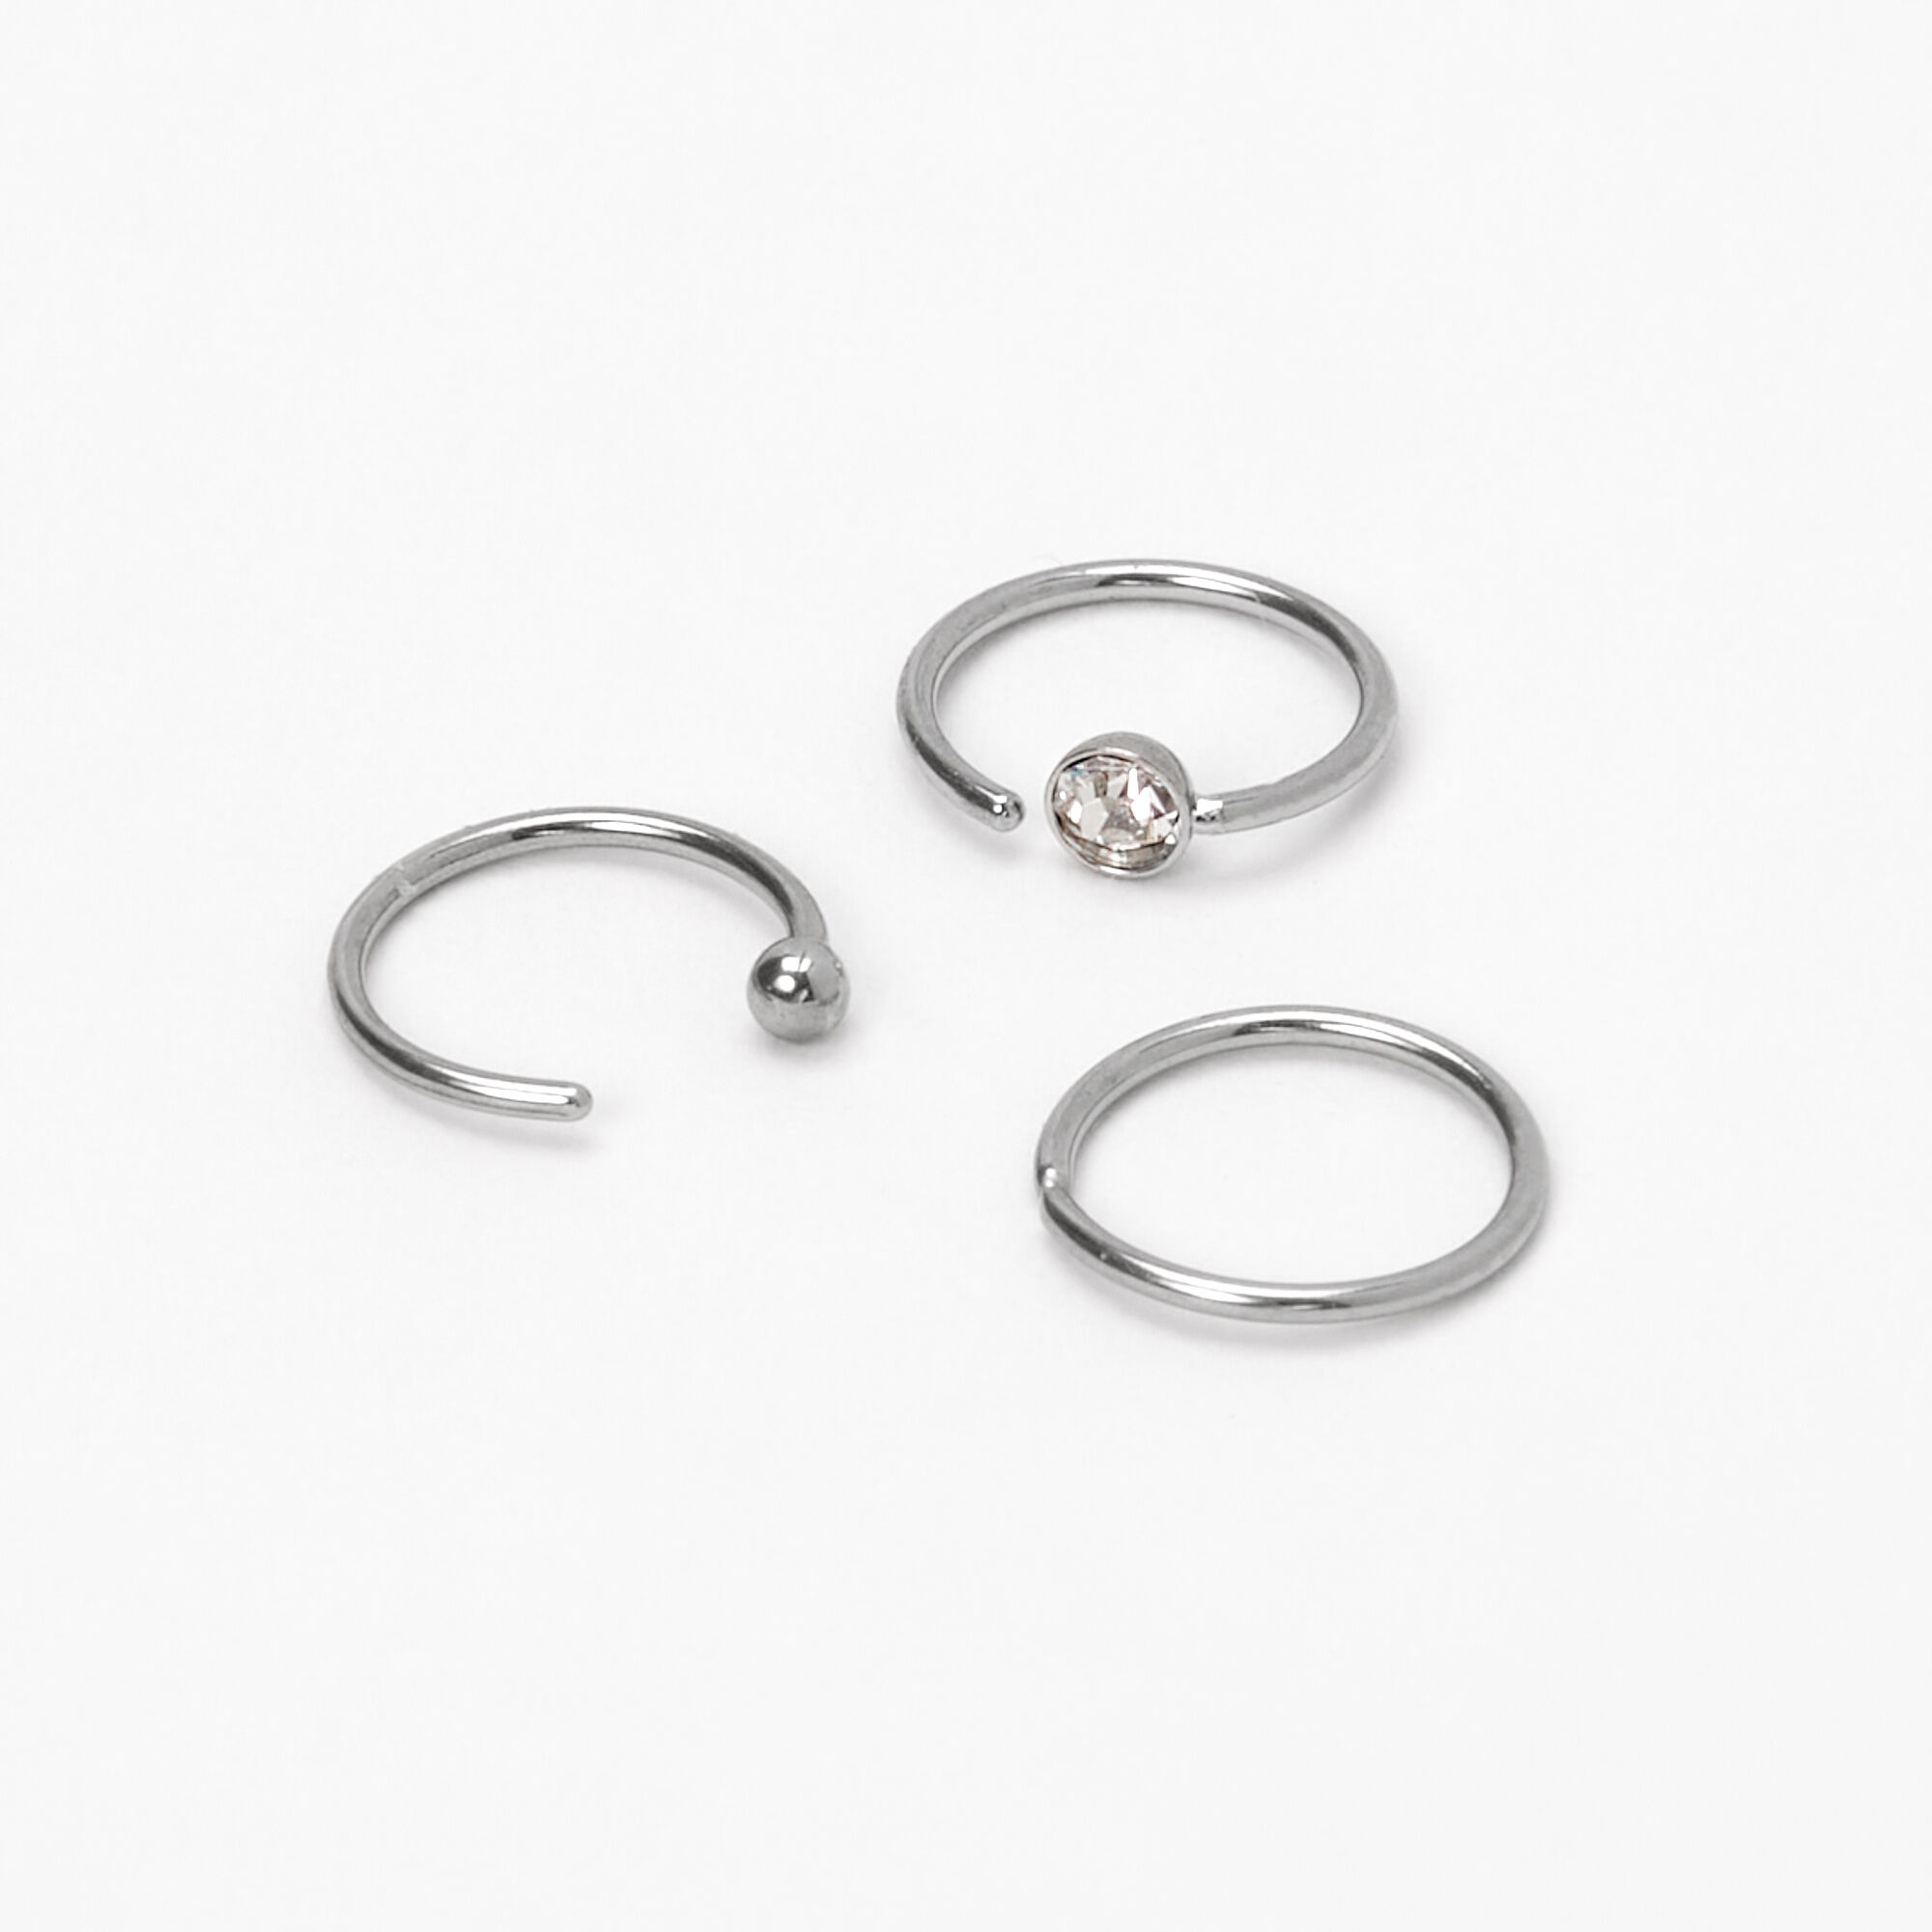 Useful-gadget Clip On Nose Ring Set Faux Piercing India | Ubuy